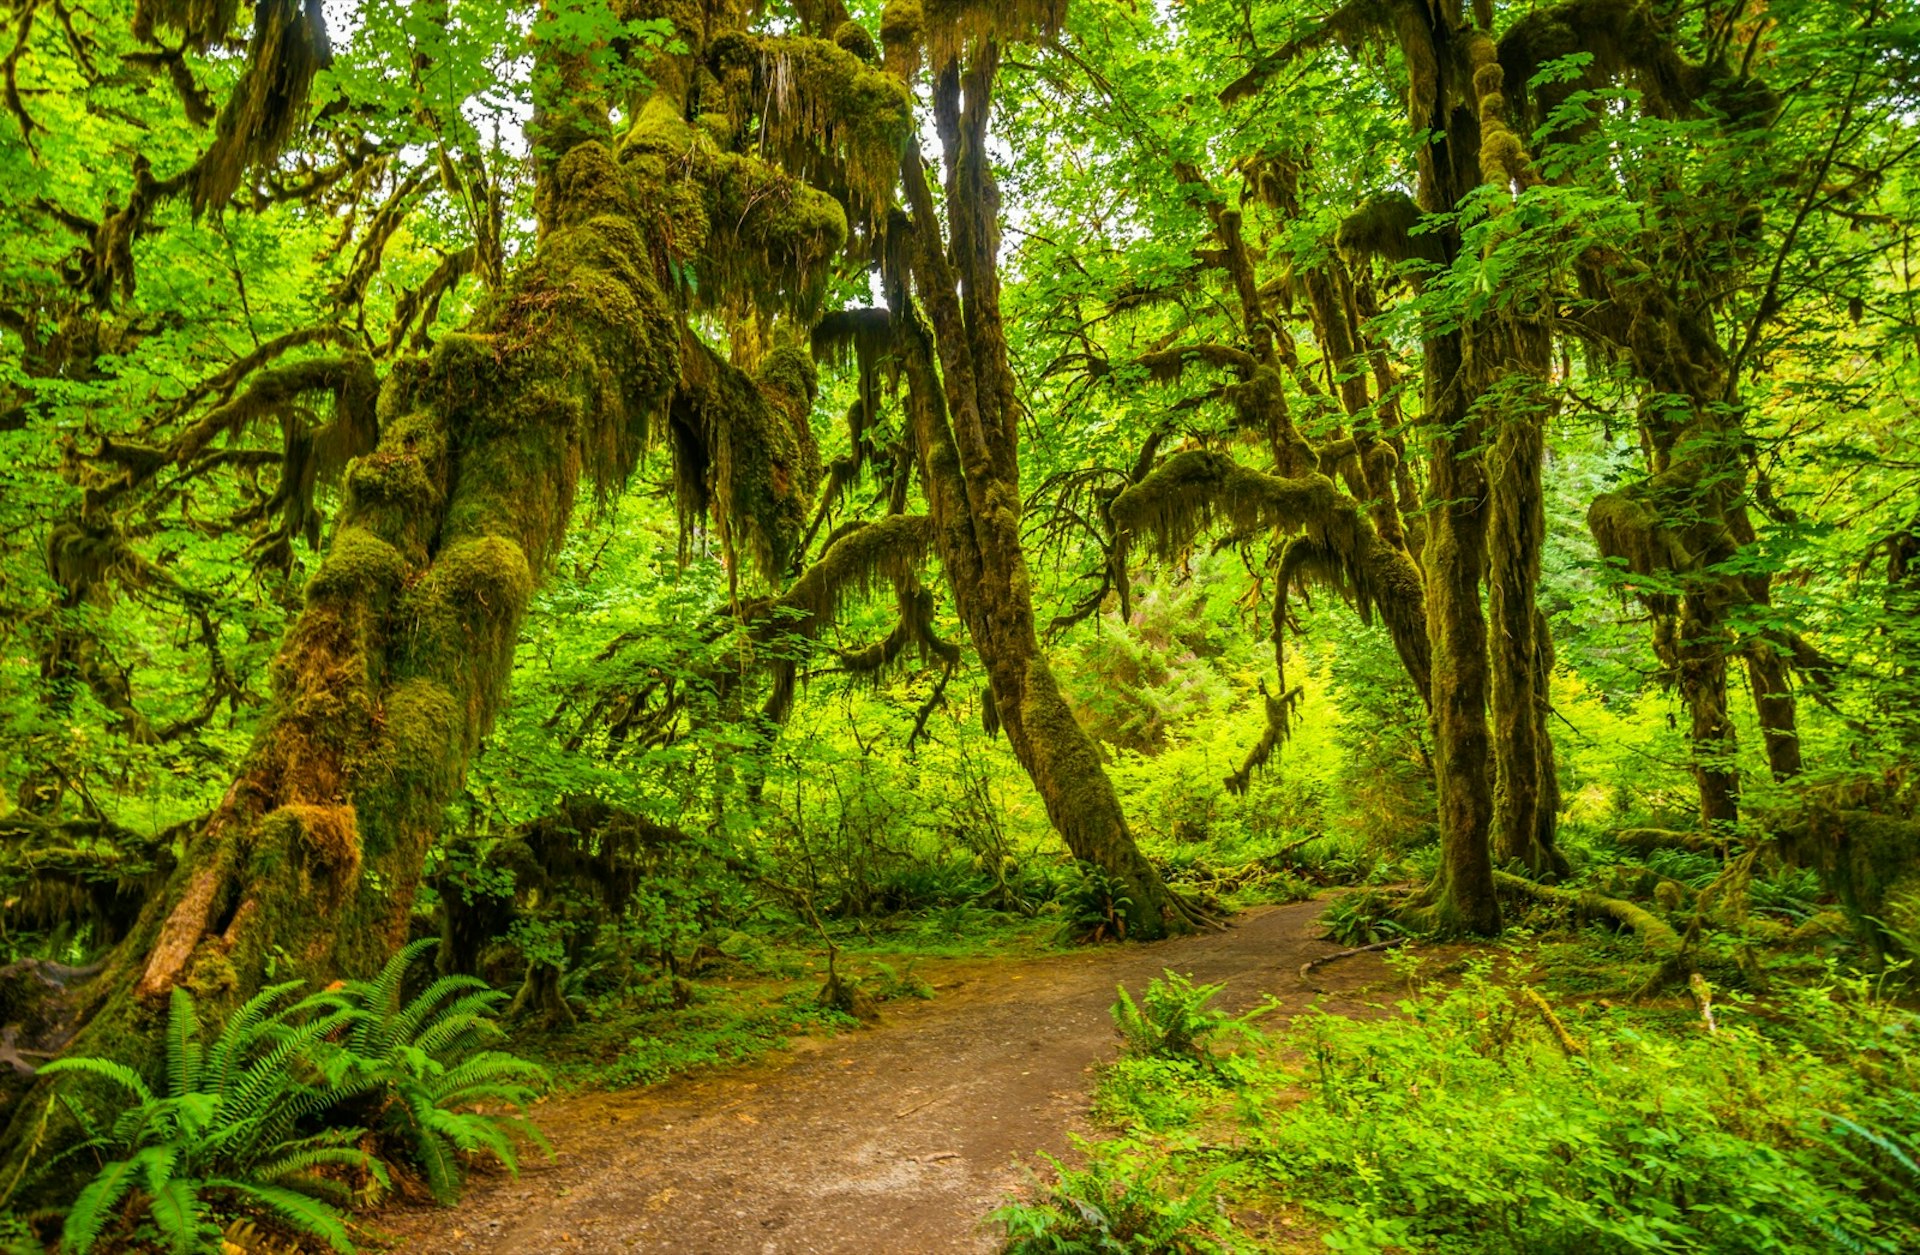 A path runs through trees dripping with moss and foliage in Olympic National Park in Washington